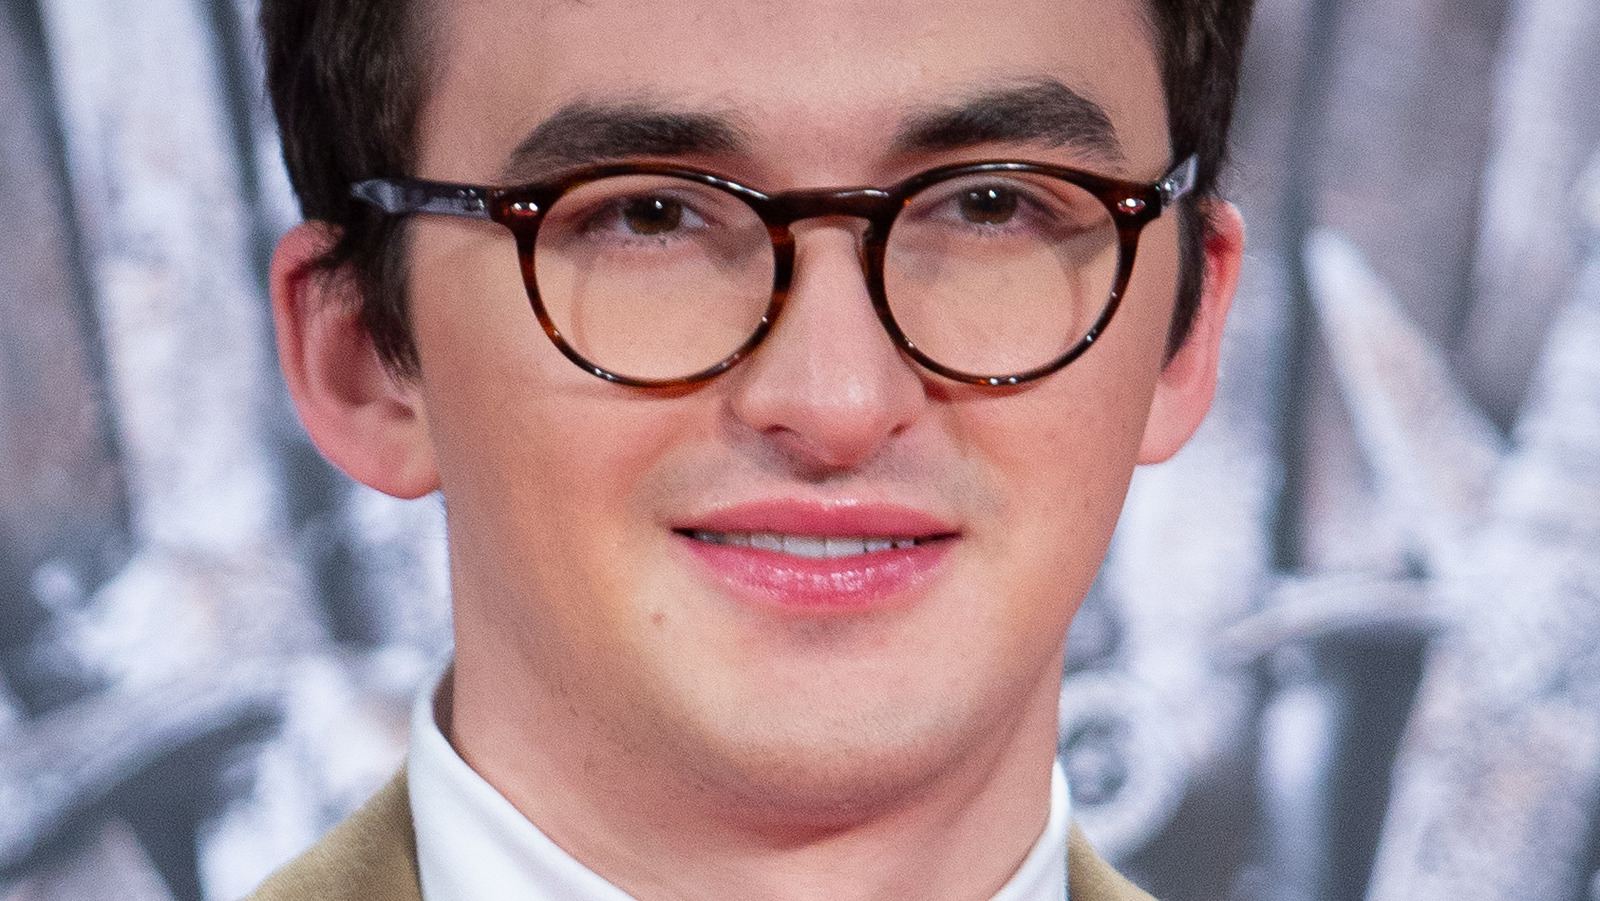 How Isaac Hempstead Wright Got Under Kristian Nairn’s Skin On The Set Of Game Of Thrones – Looper